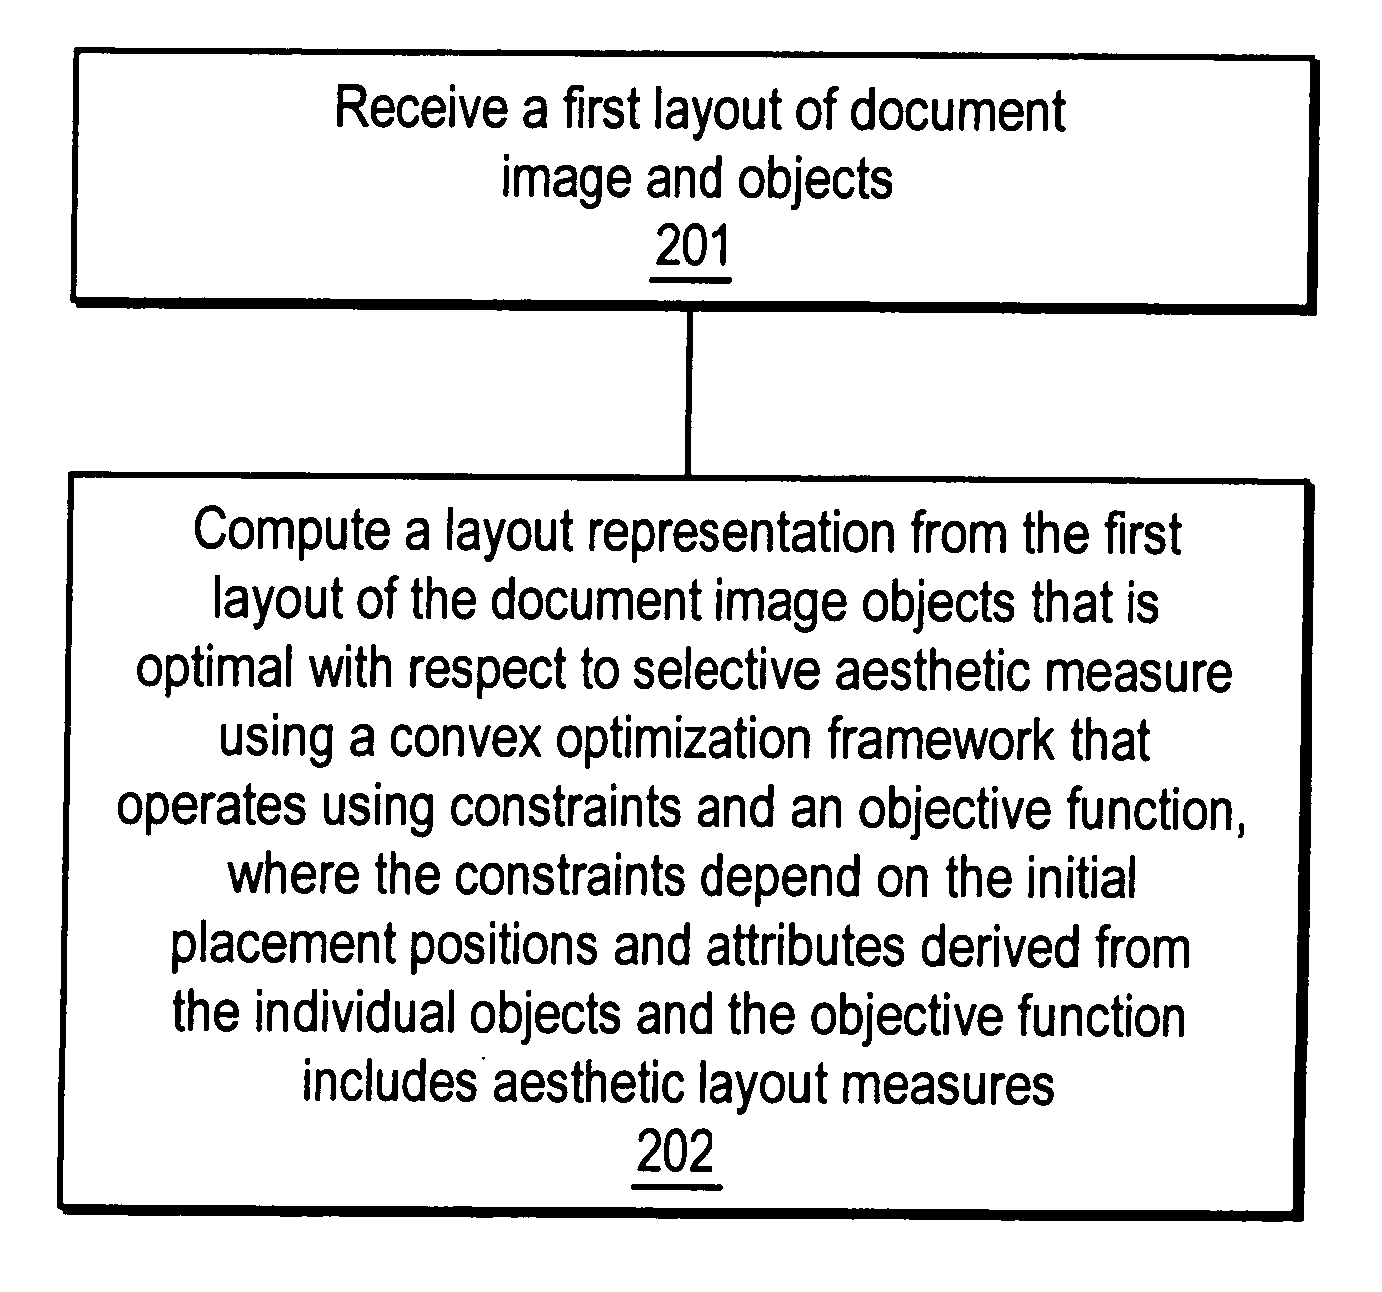 Automated document layout design